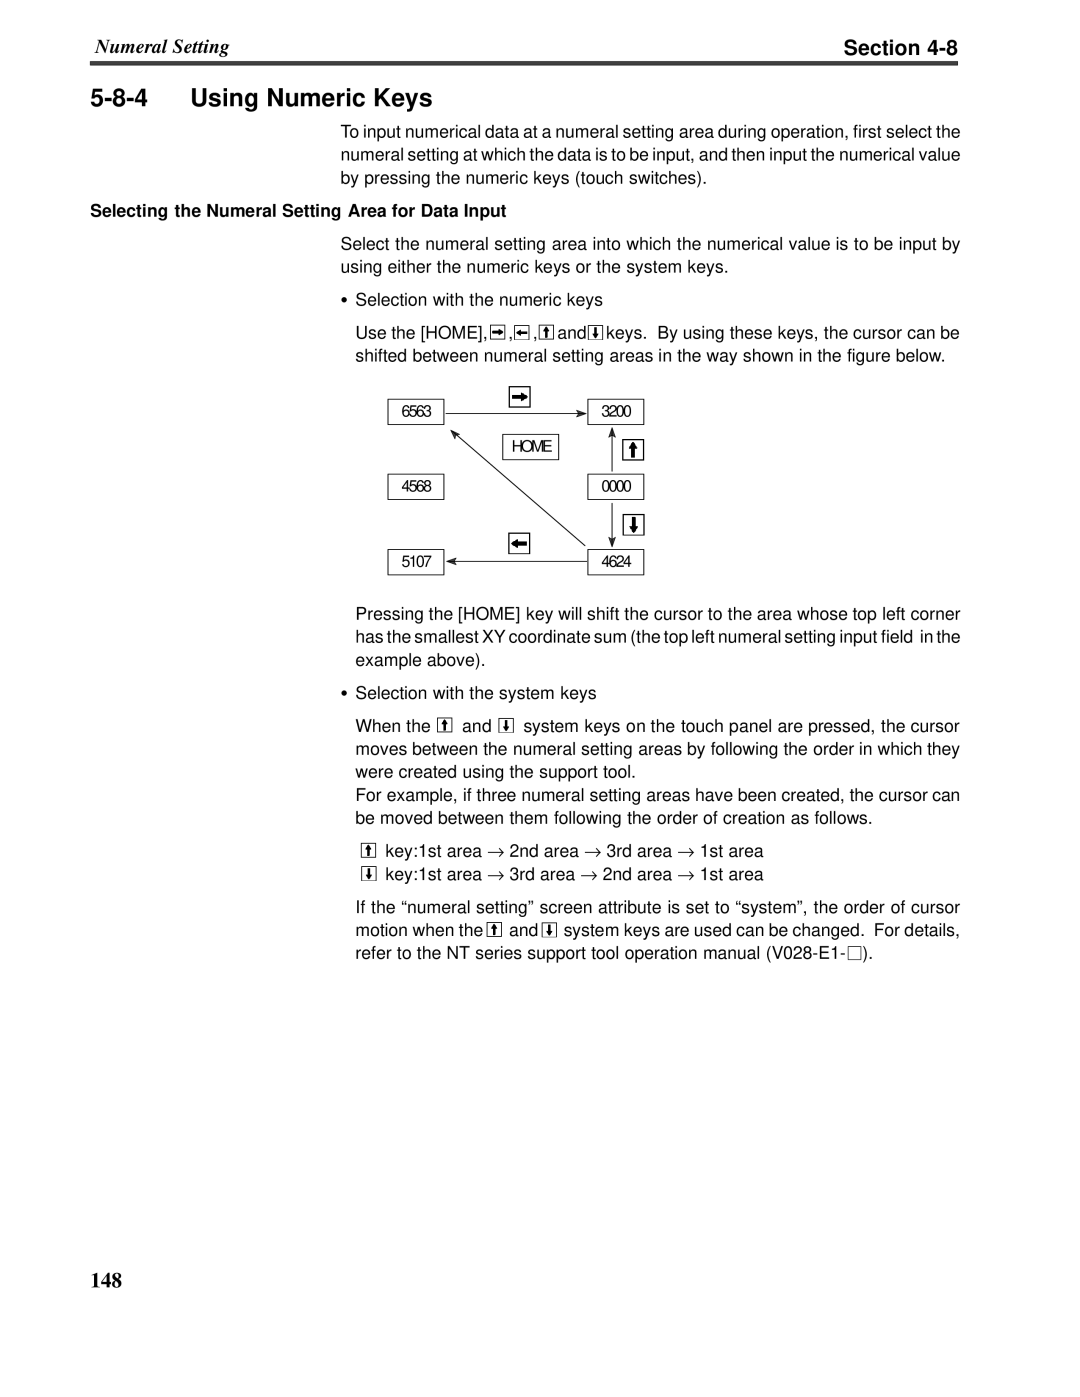 Omron V022-E3-1 operation manual 5-8-4Using Numeric Keys, Section, Selecting the Numeral Setting Area for Data Input 